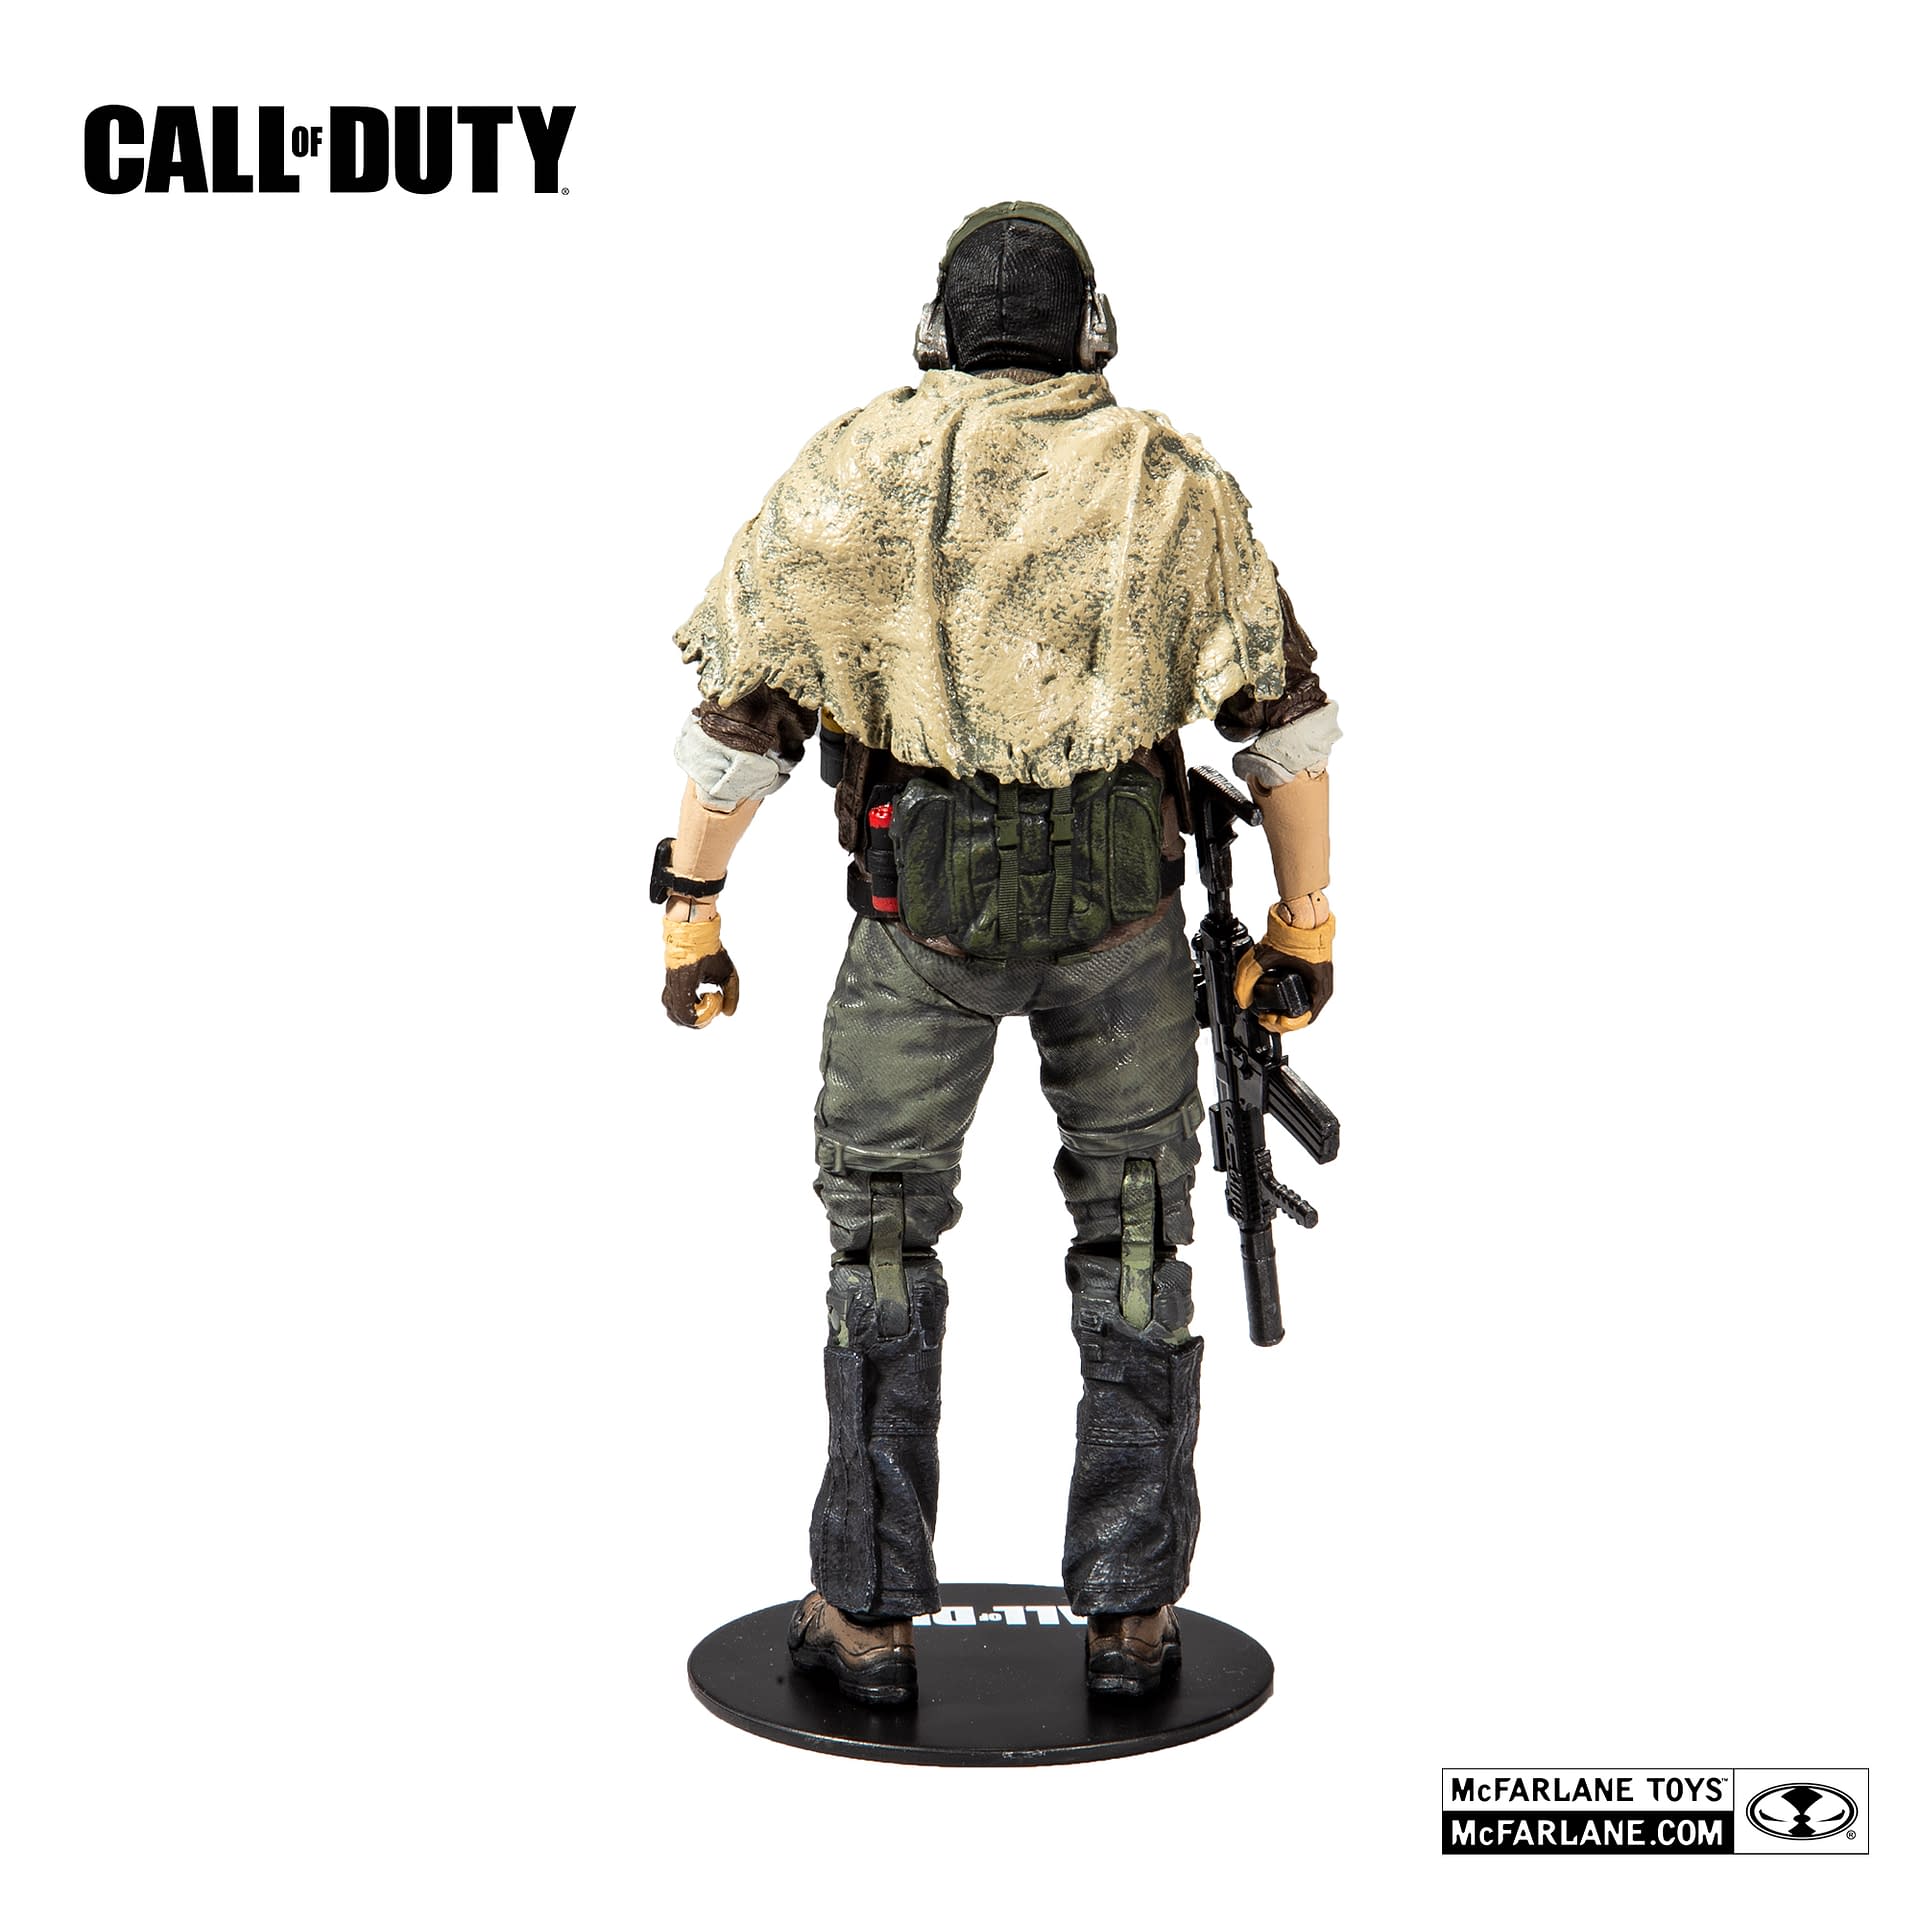 Call of Duty Ghost Enters the War with McFarlane Toys